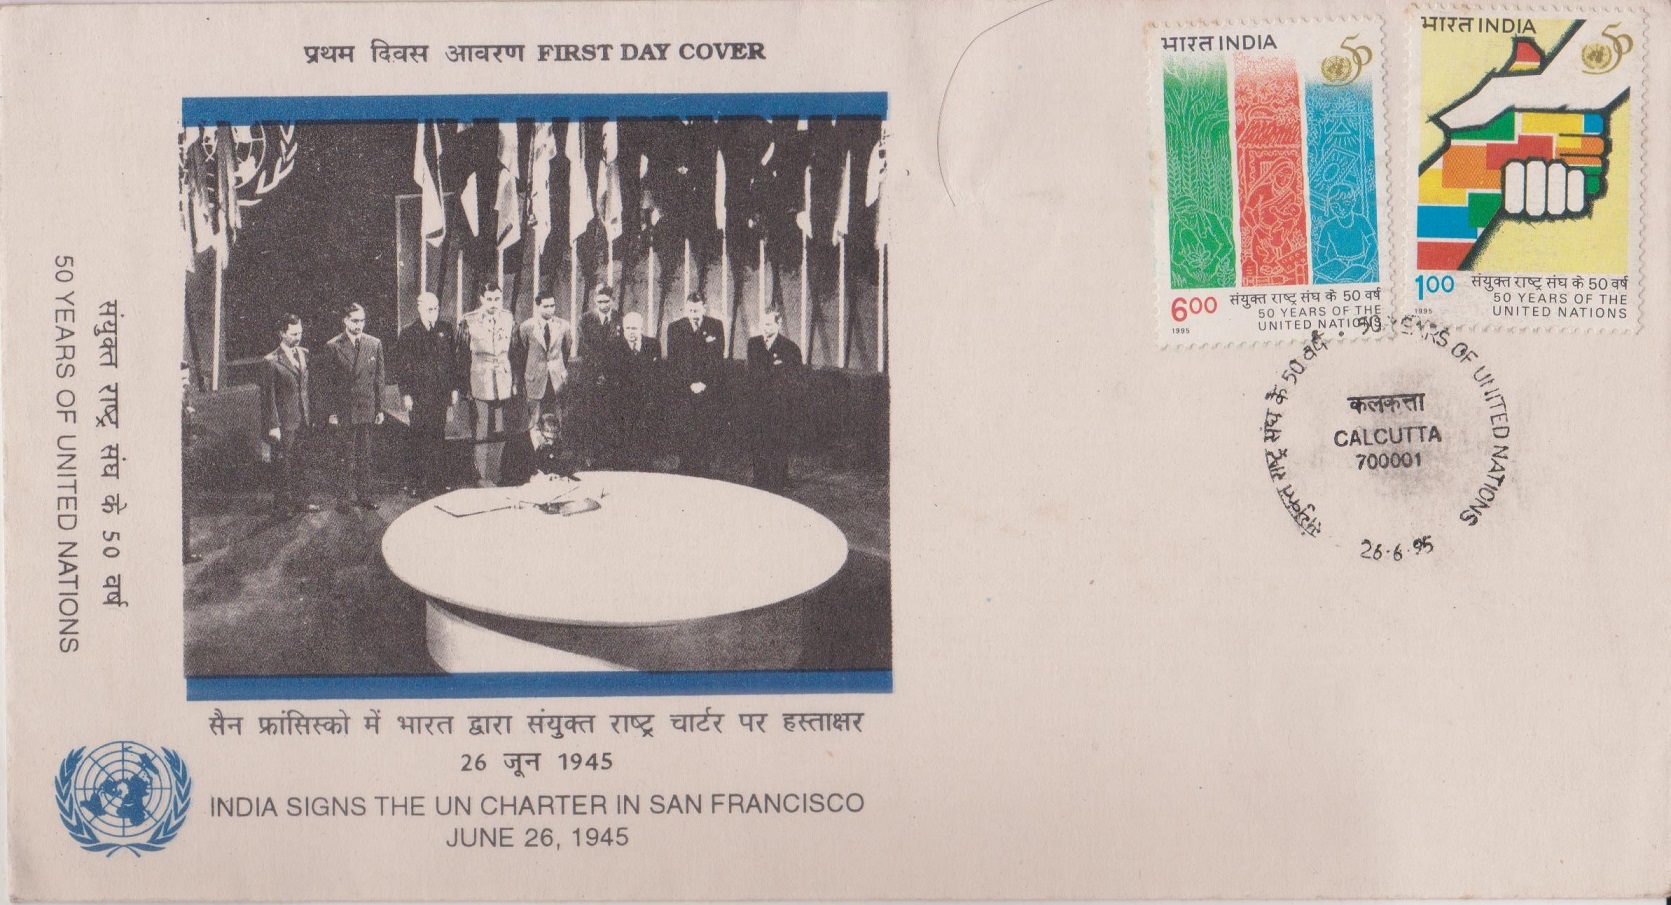 India Signs the UN Charter in San Francisco, June 26, 1945